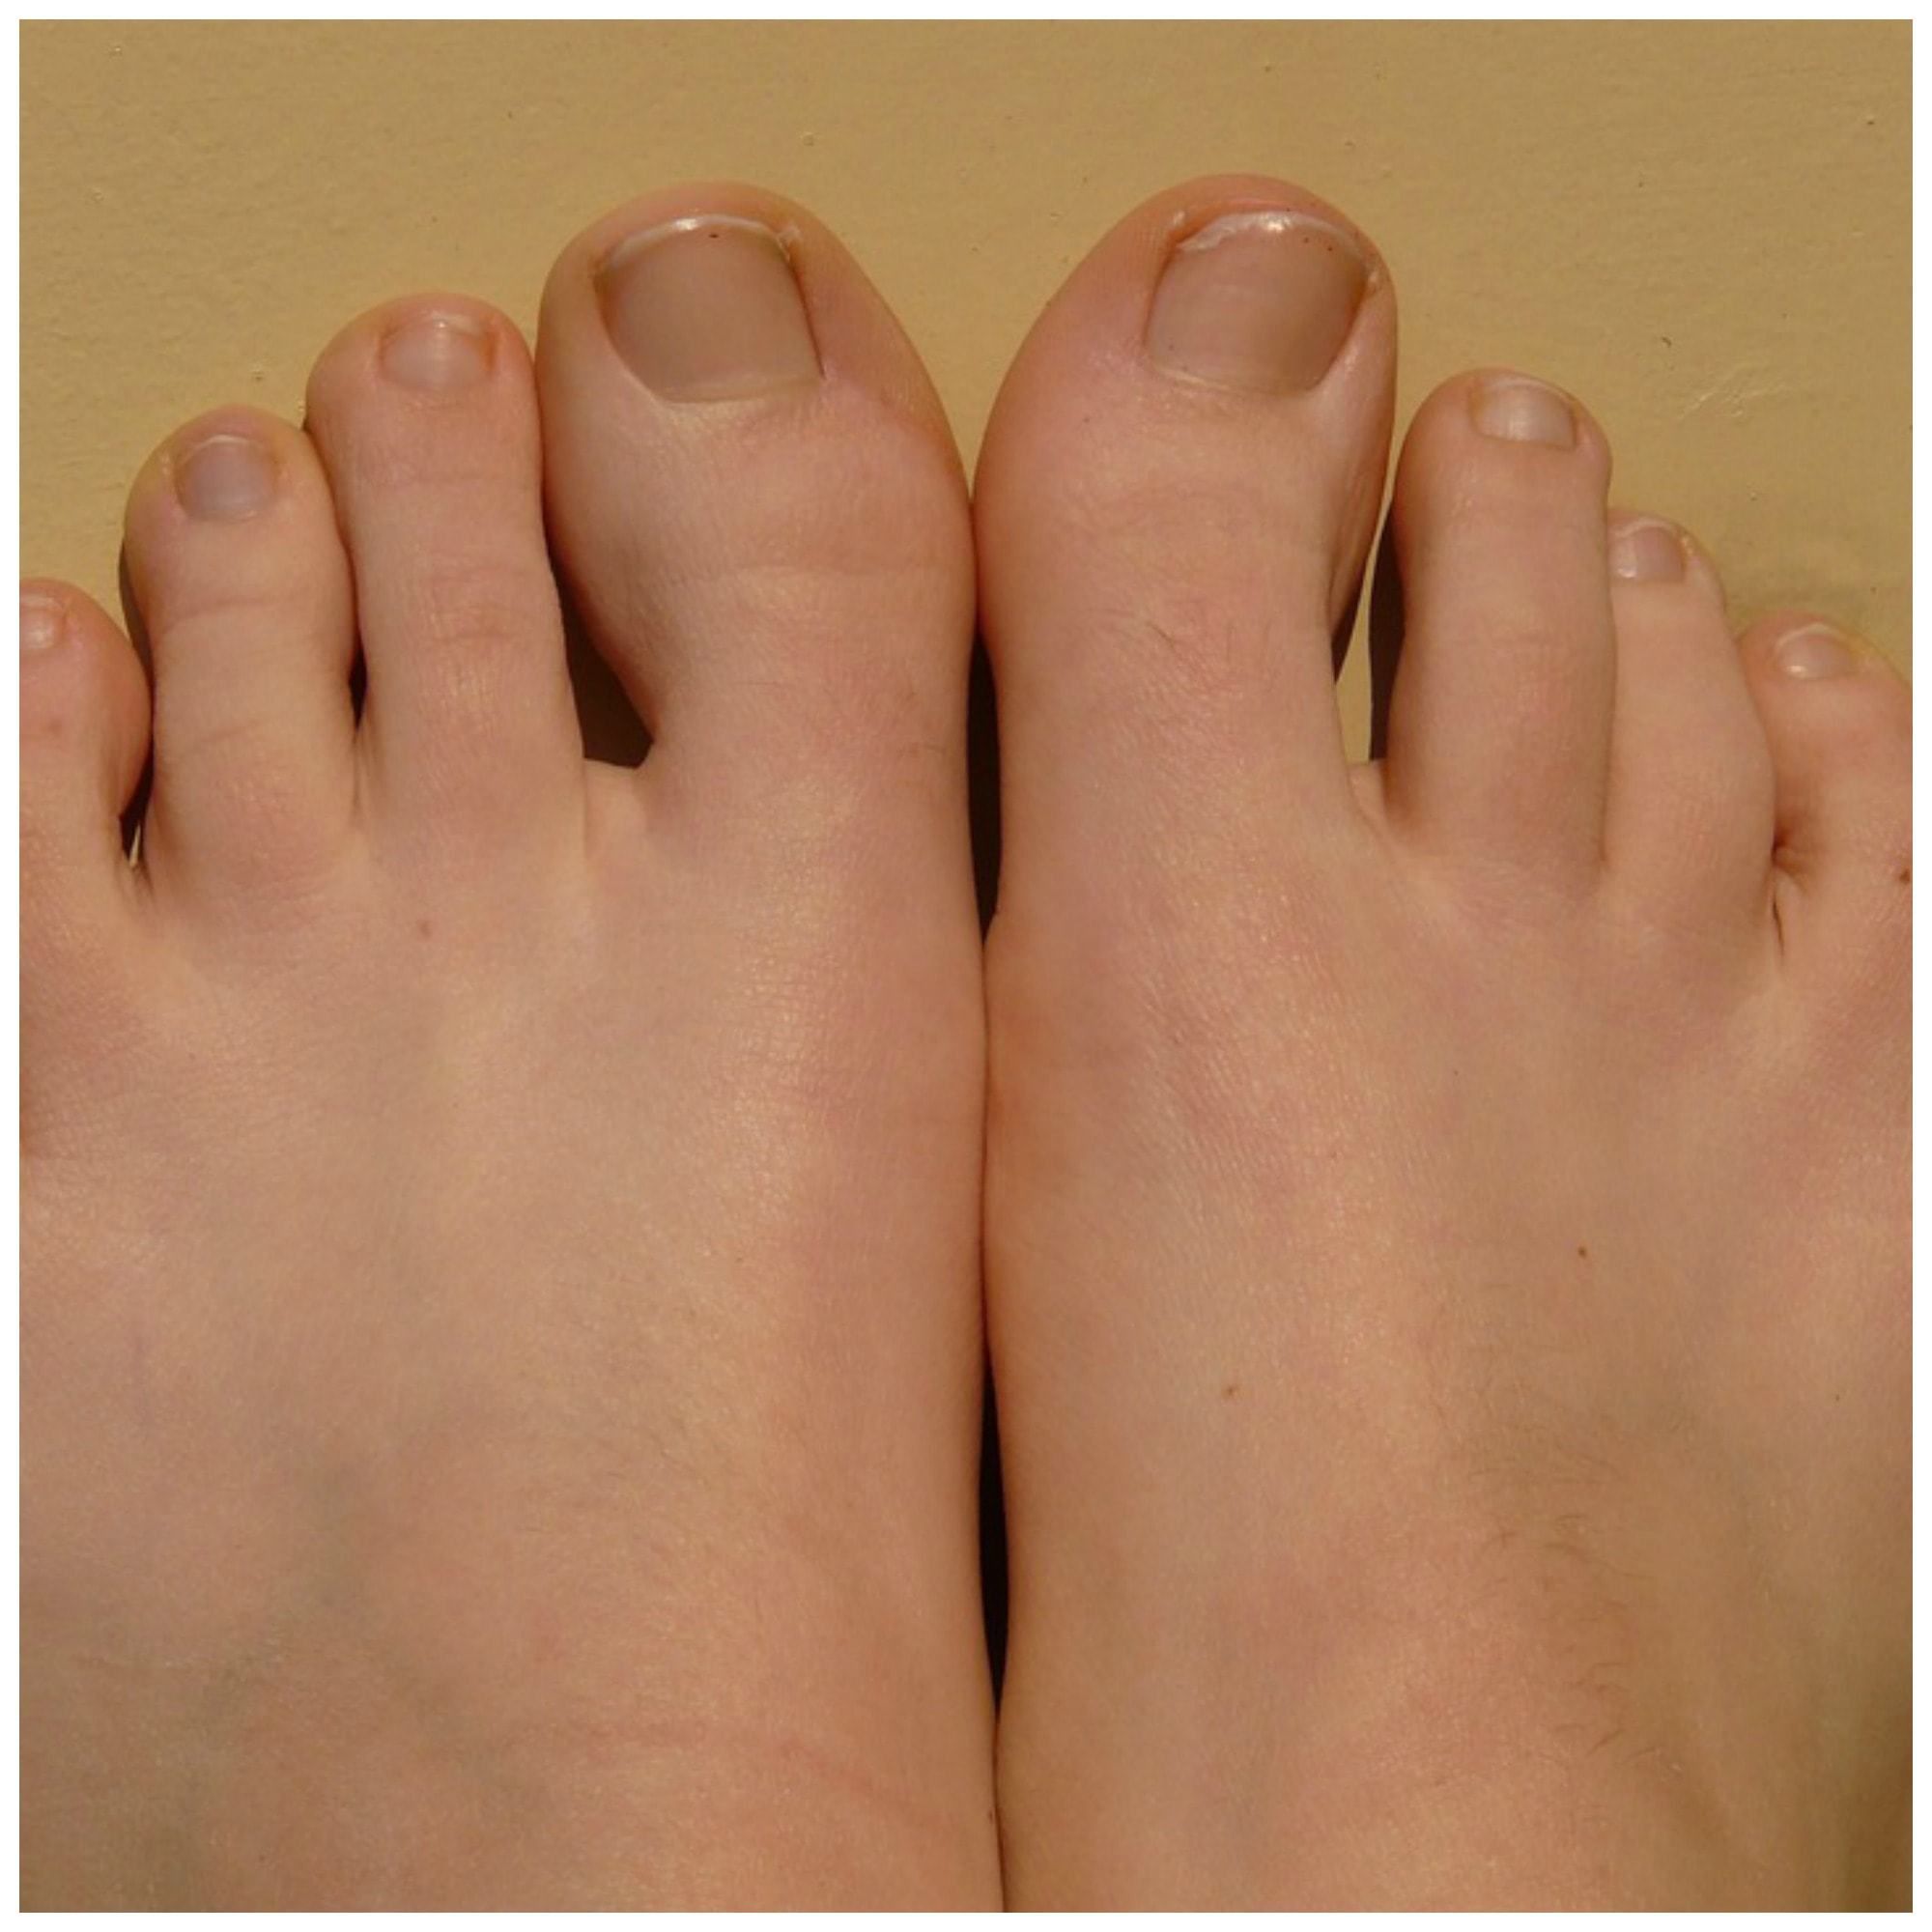 Why Do You Put Essential Oils On Your Feet?